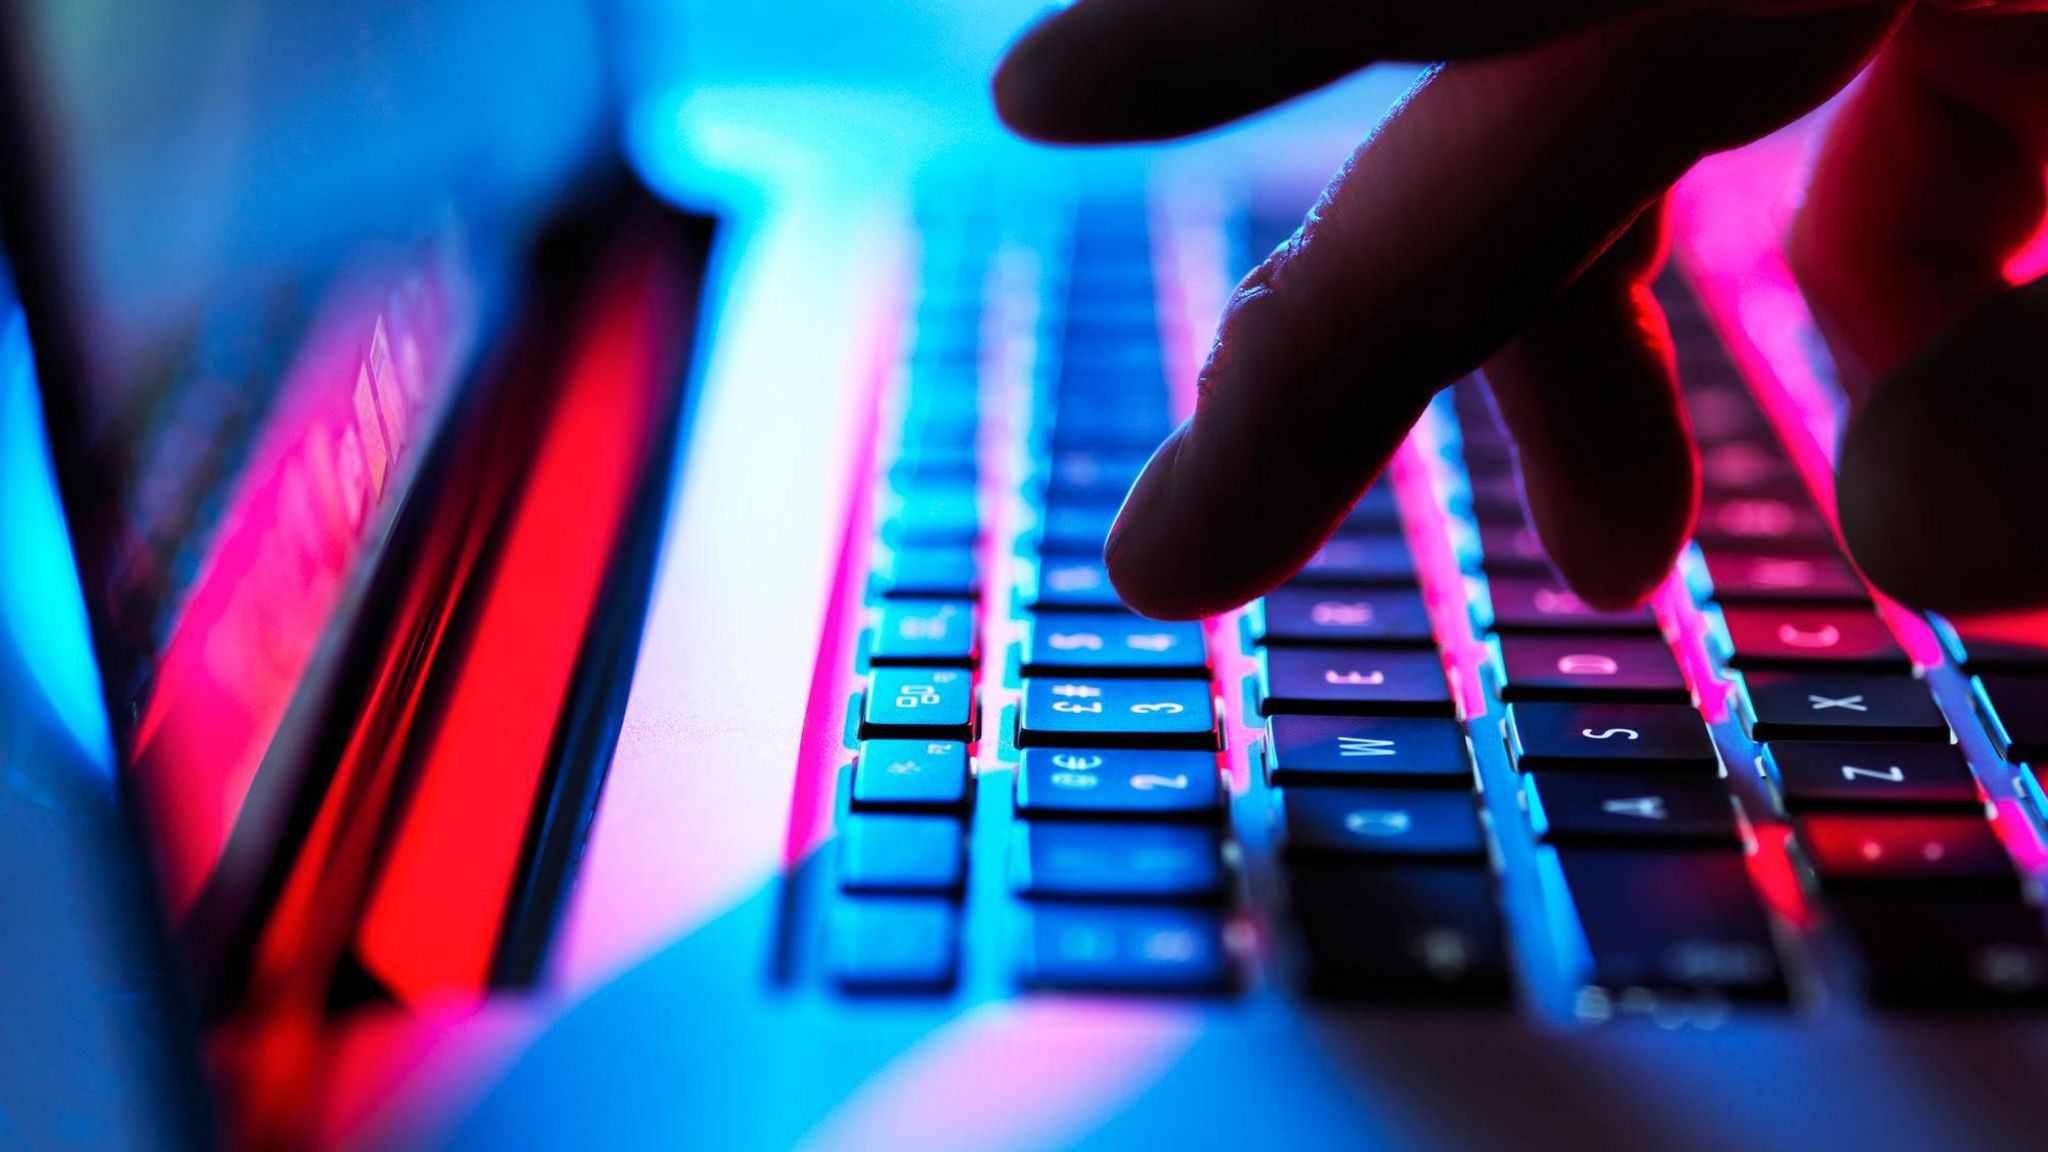 Pupils miss classes as school cyber-attacks rise